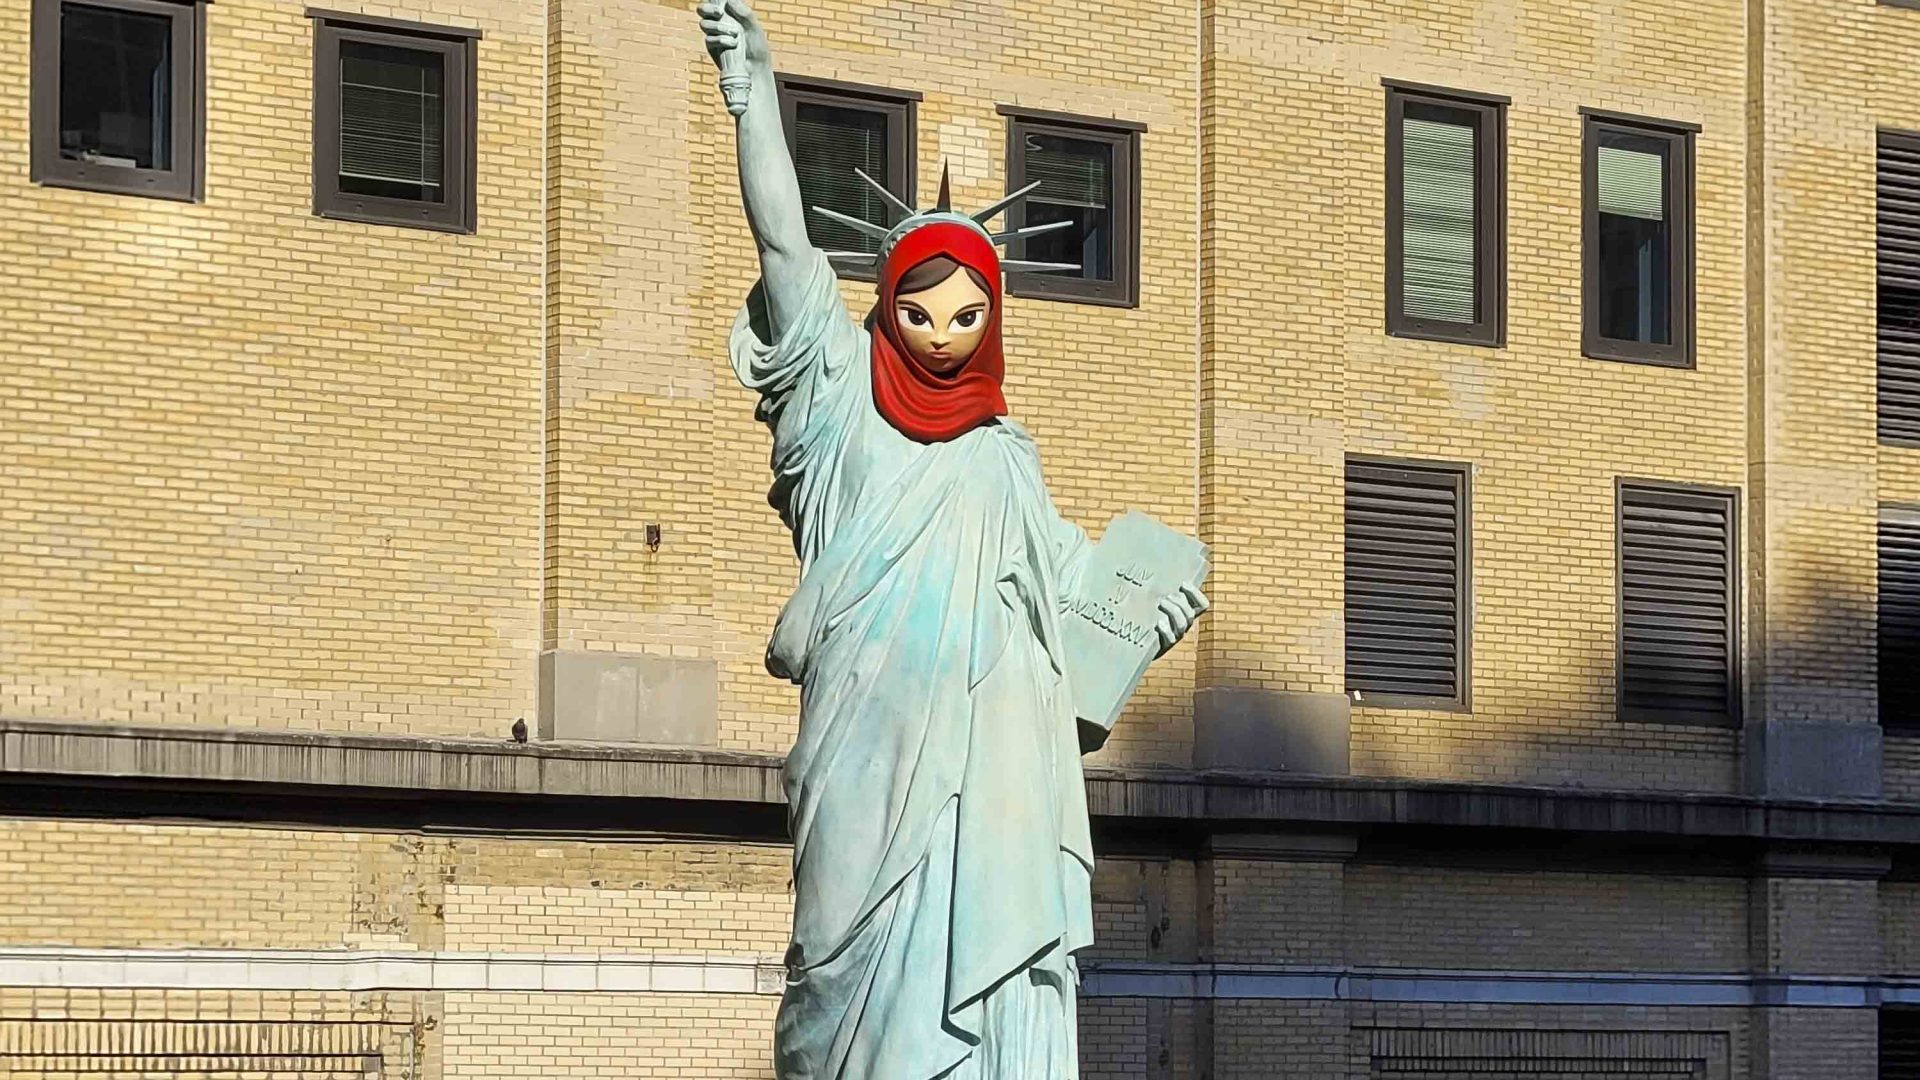 A piece of art that looks like Lady Liberty wearing a red hijab.